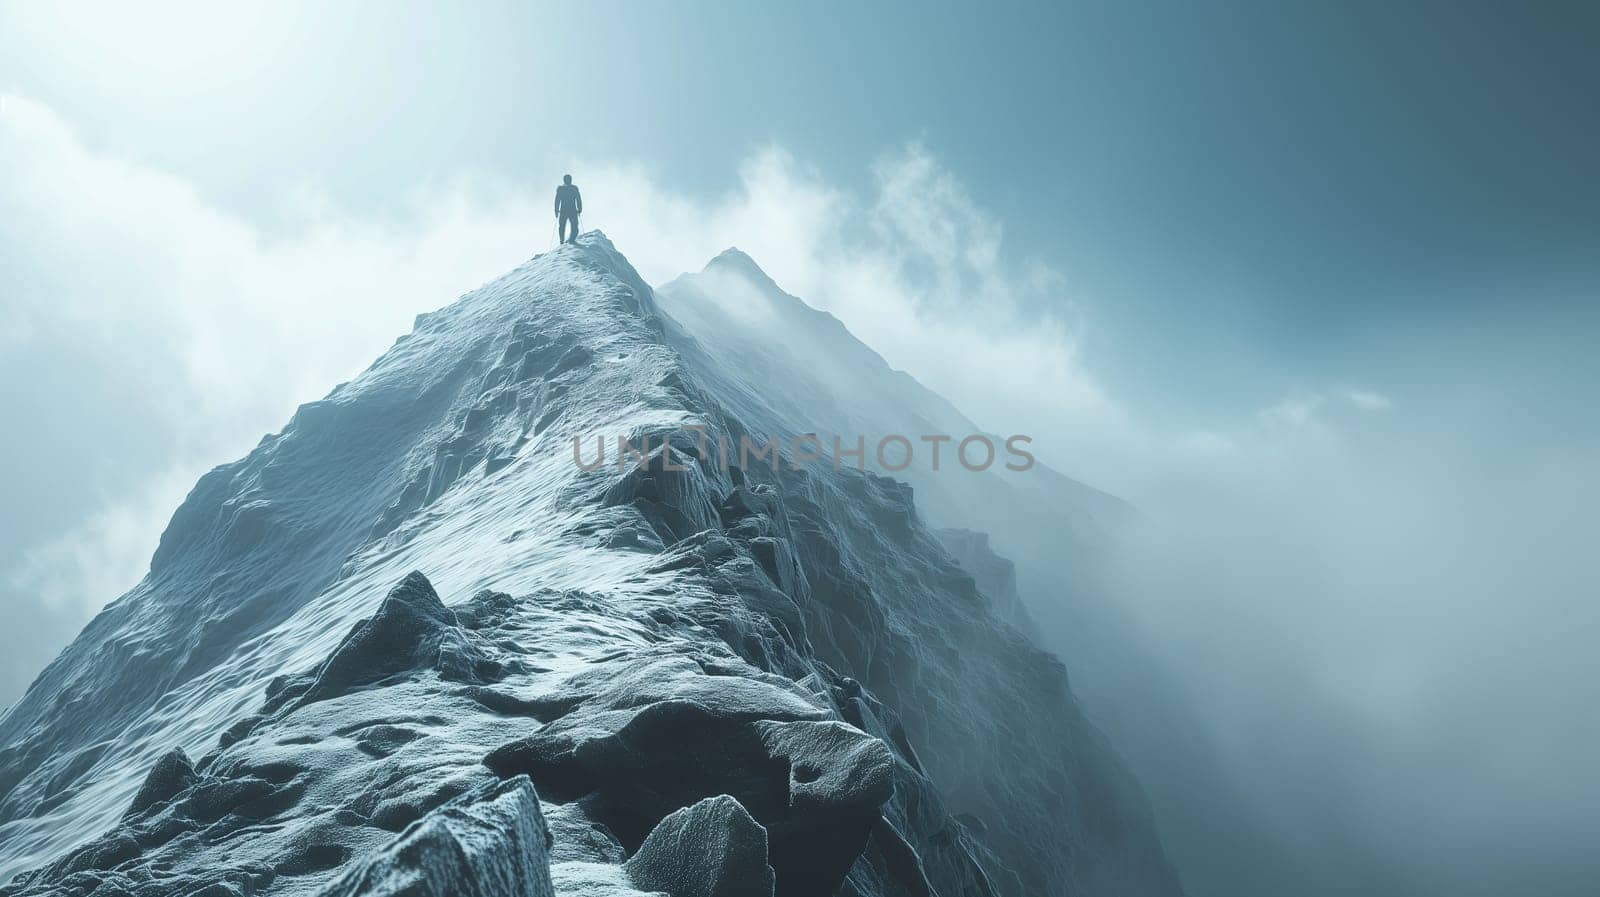 Lone Climber Reaching the Summit of a Snowy Mountain at Dawn by chrisroll